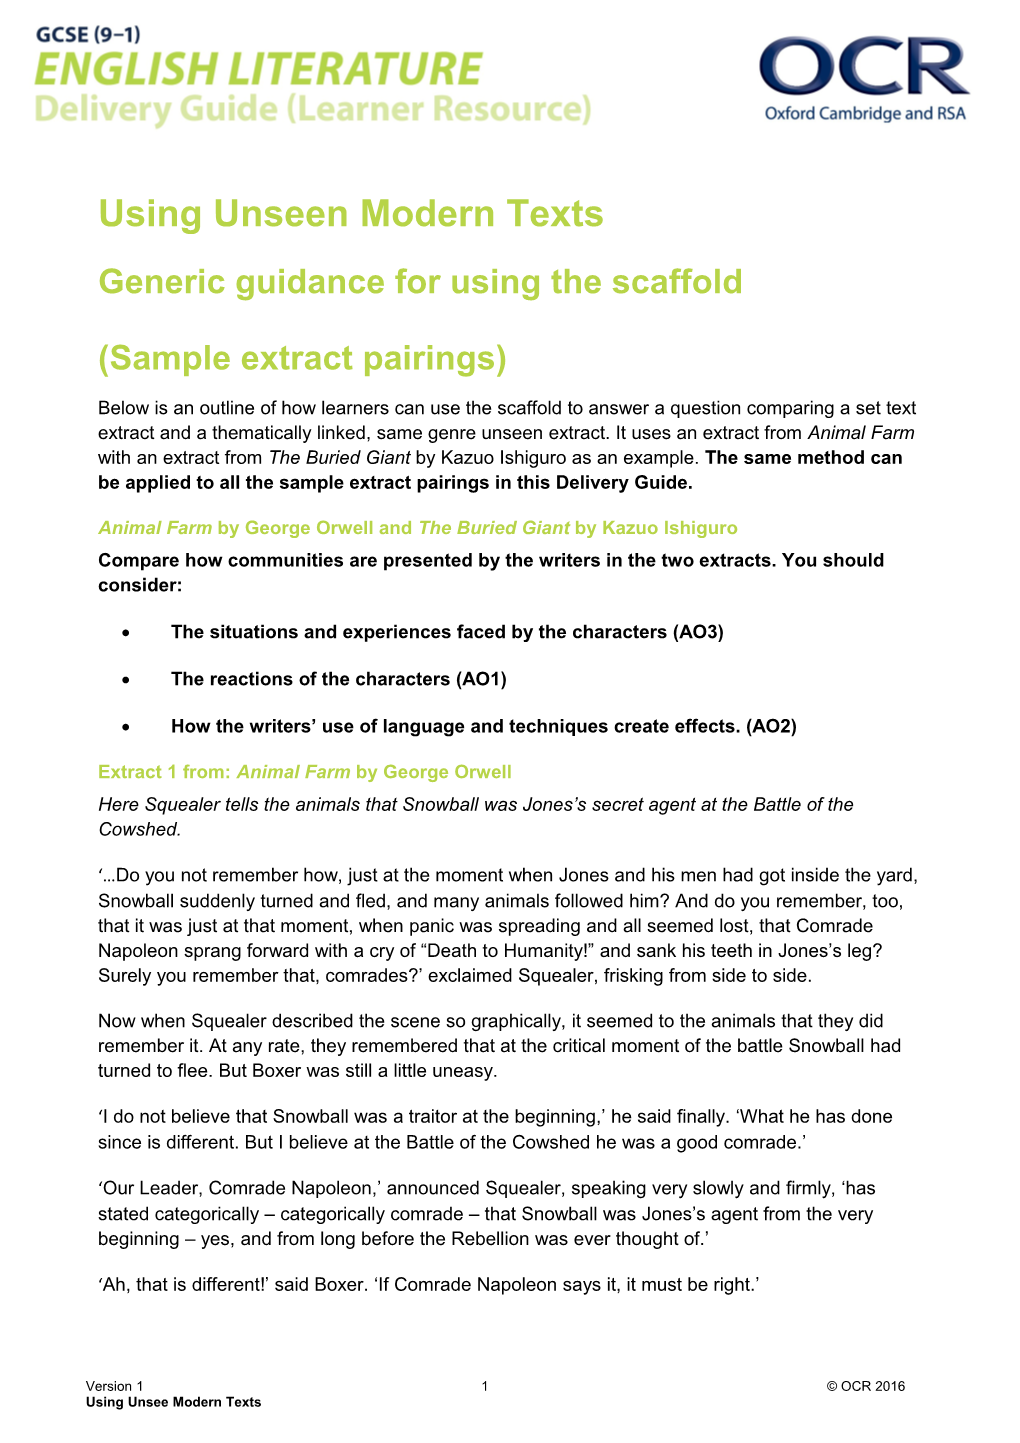 OCR GCSE English Literature Delivery Guide - General Guidance for Using the Scaffold